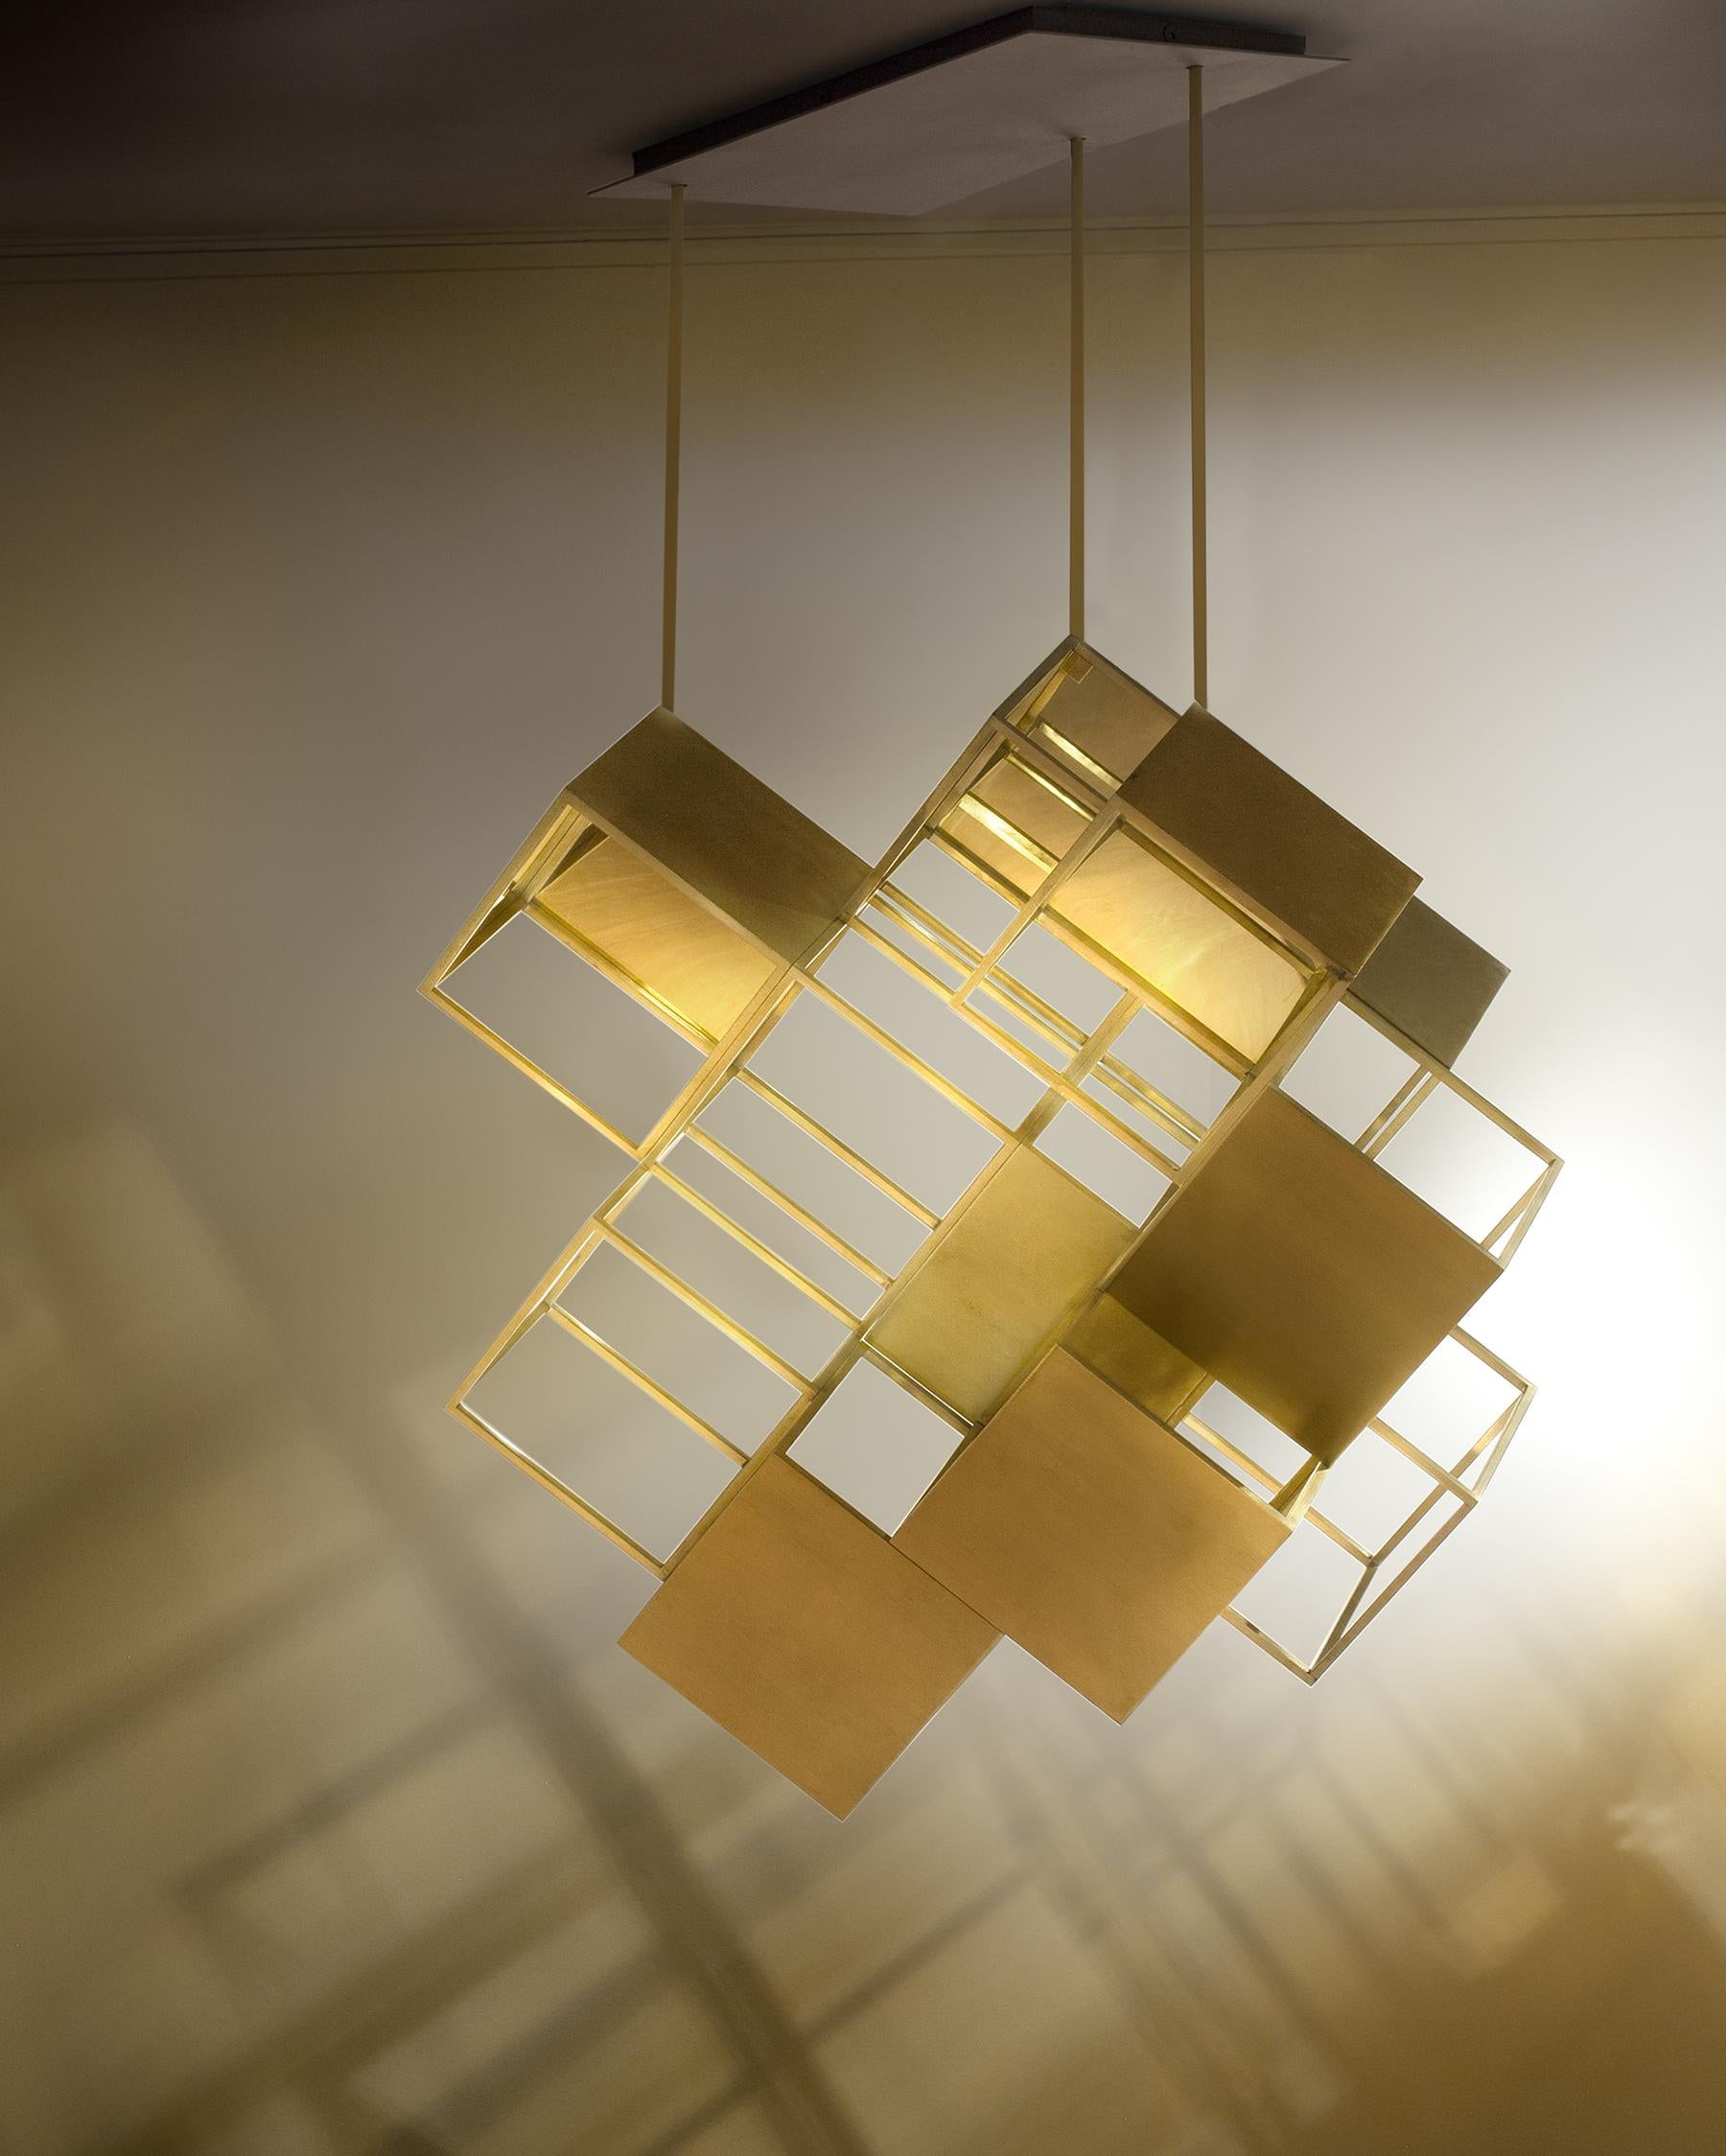 Polished Lattis Chandelier XL - Solid brass chandelier handmade by Diaphan Studio For Sale